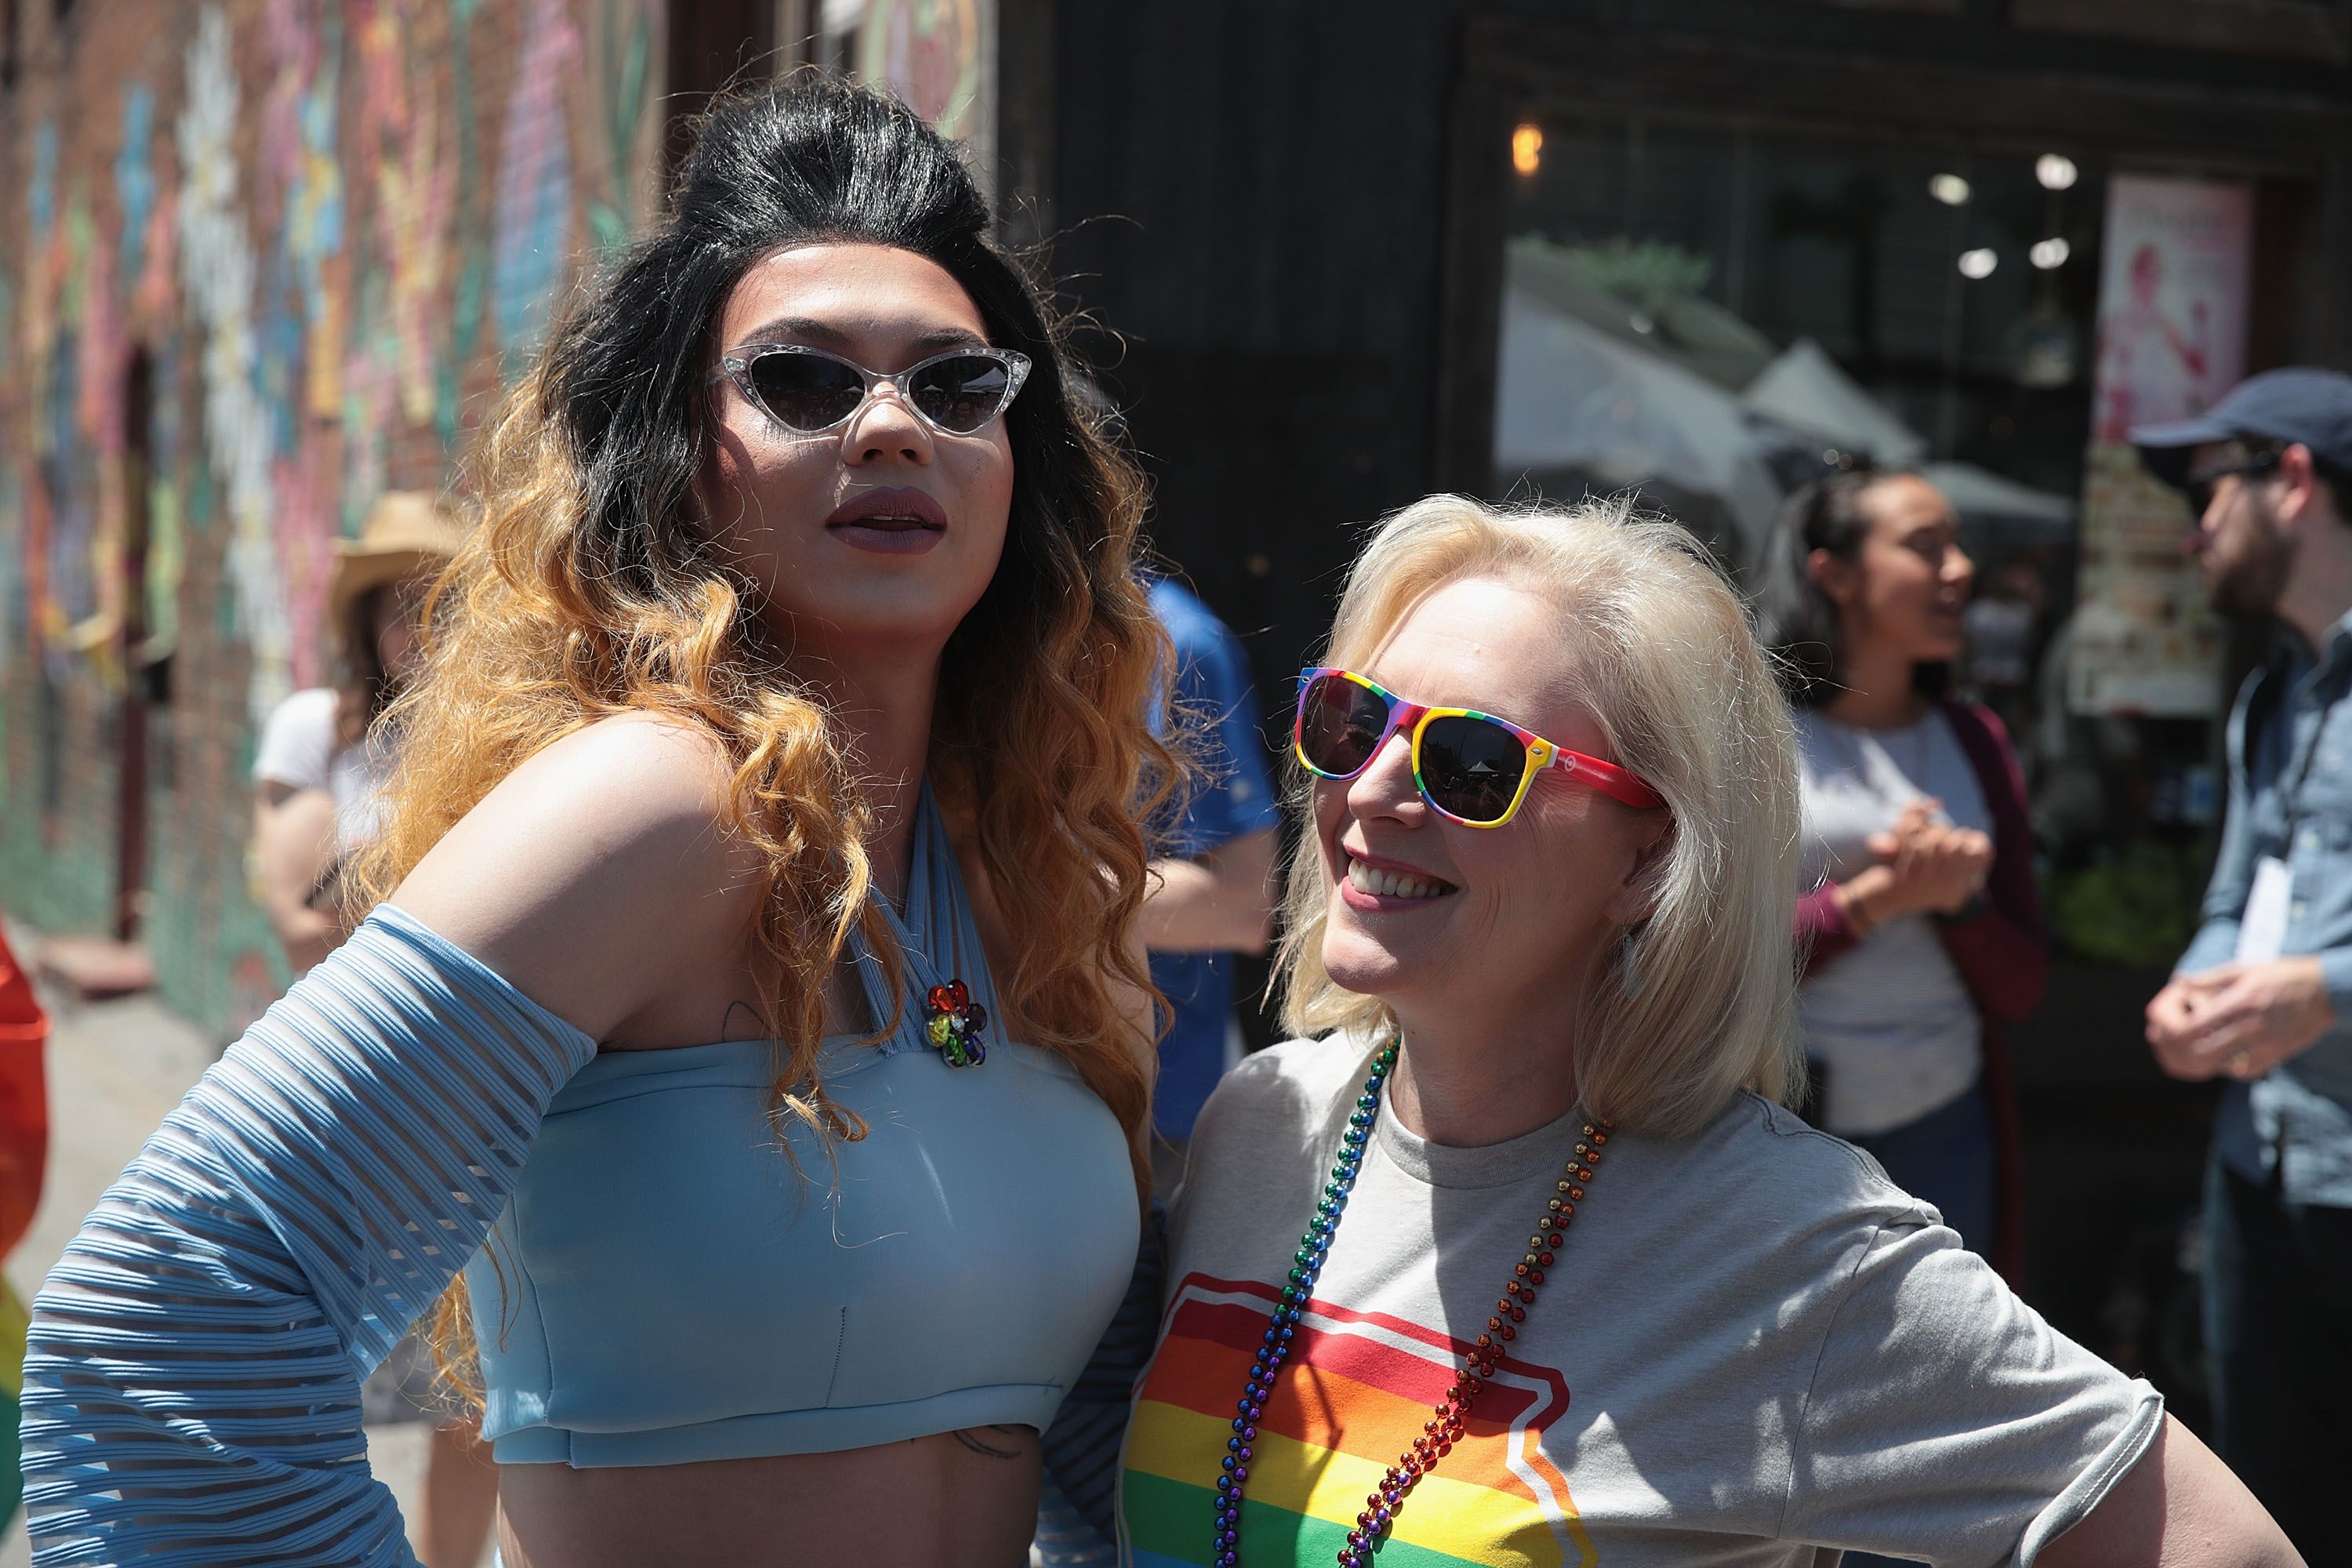 Democratic presidential candidate and New York senator Kirsten Gillibrand (R) tours the Capital City Pride Fest with drag queen Vana Rosenberg on June 08, 2019 in Des Moines, Iowa. 